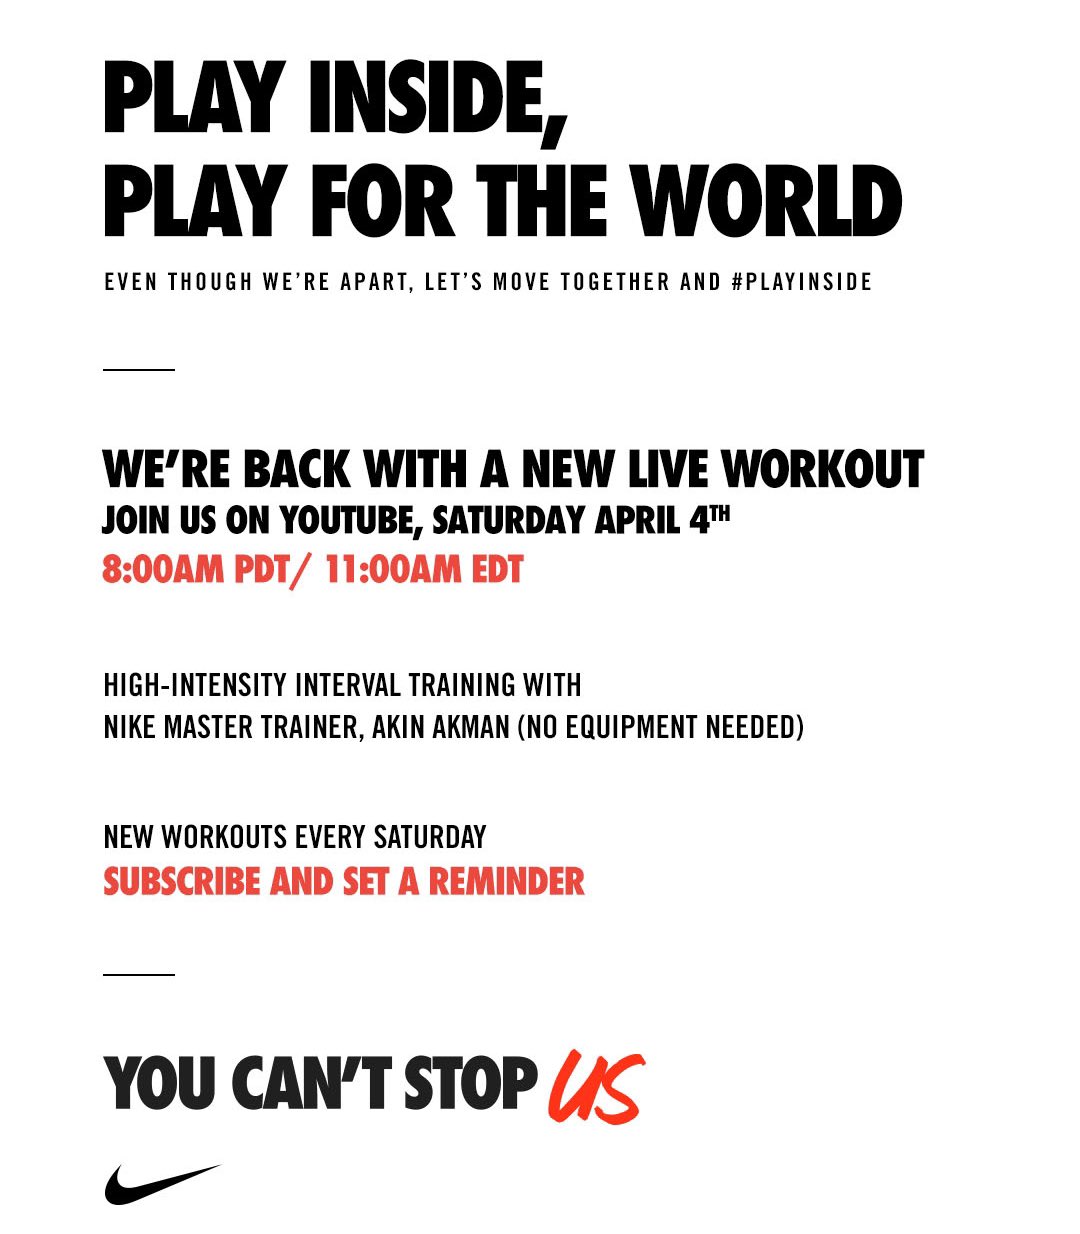 pasatiempo Repulsión Agarrar Nike Basketball on Twitter: "We saved you a spot. Join us for a live NTC  workout on Saturday led by Nike Master Trainer, @akin87. Jump in:  https://t.co/4k6FzAYInK #playinside #playfortheworld  https://t.co/xWXGtJvKQD" / Twitter